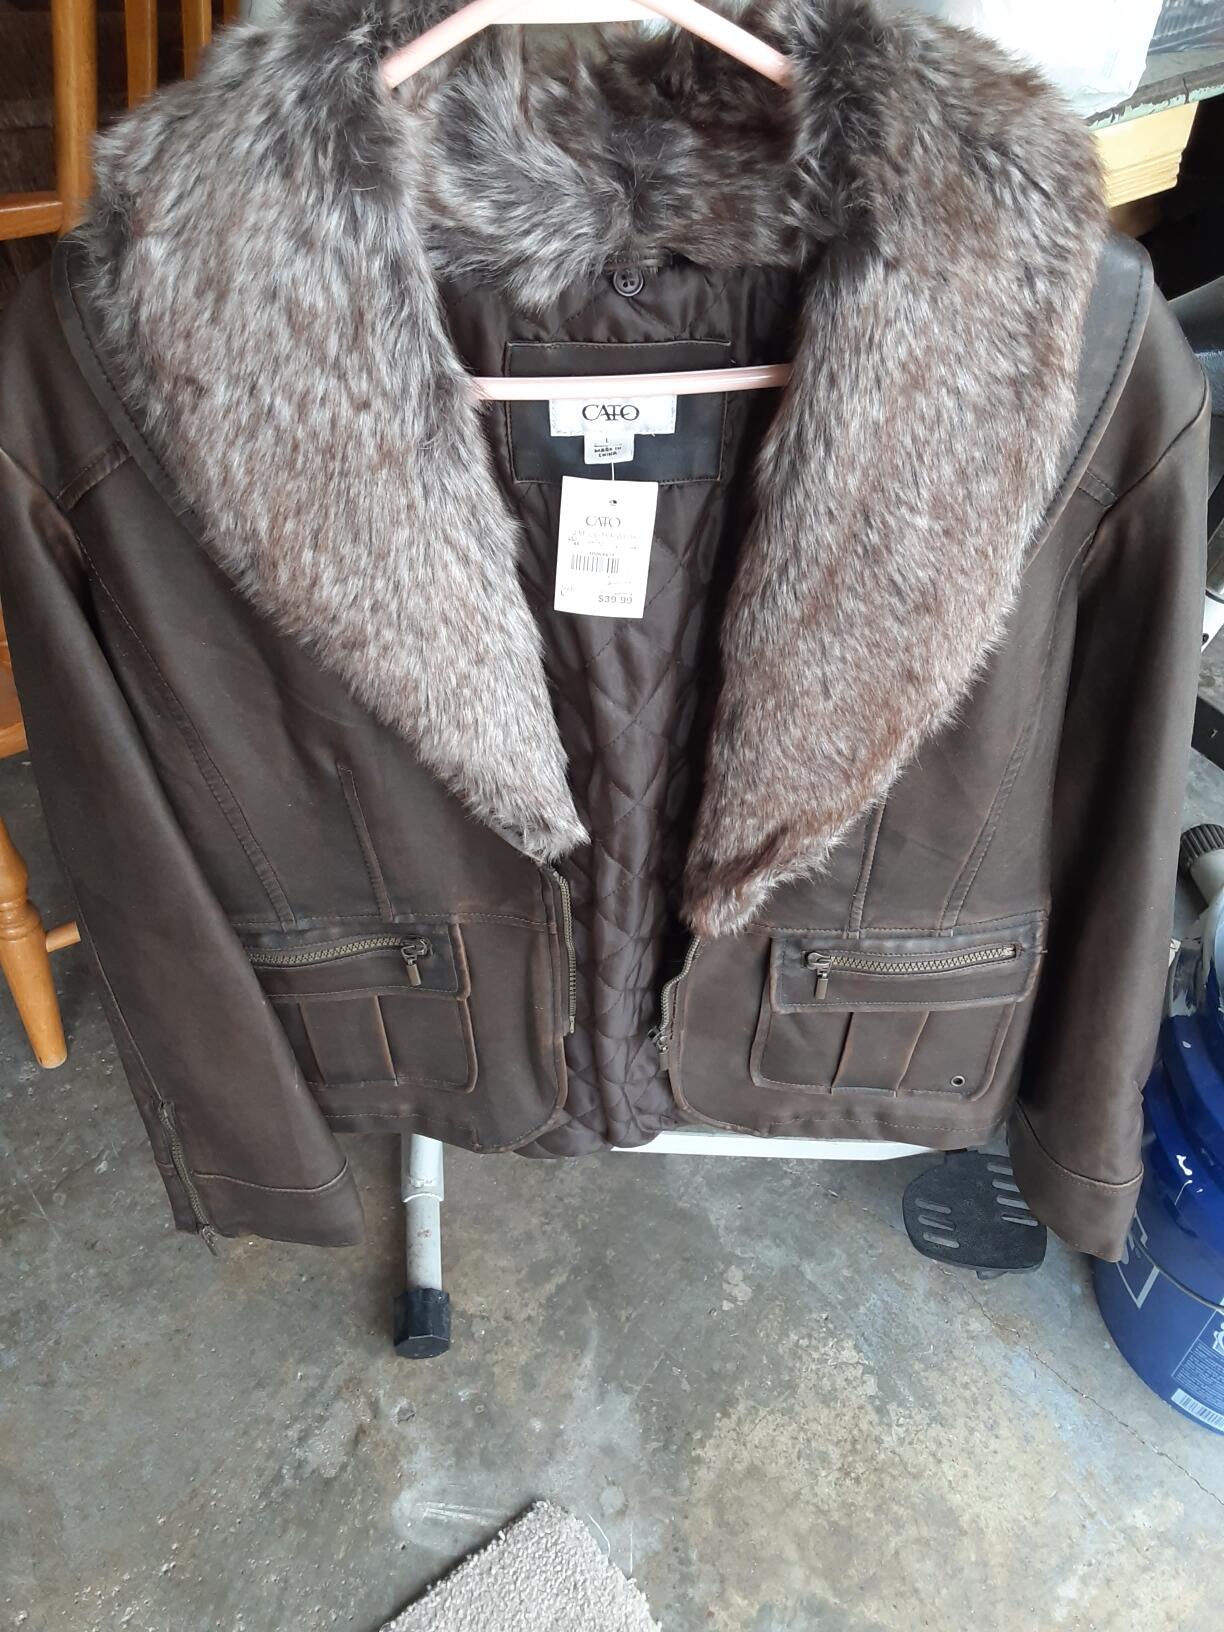 New Ladies Jacket size Large for $8 in Brownsburg, IN | For Sale & Free ...